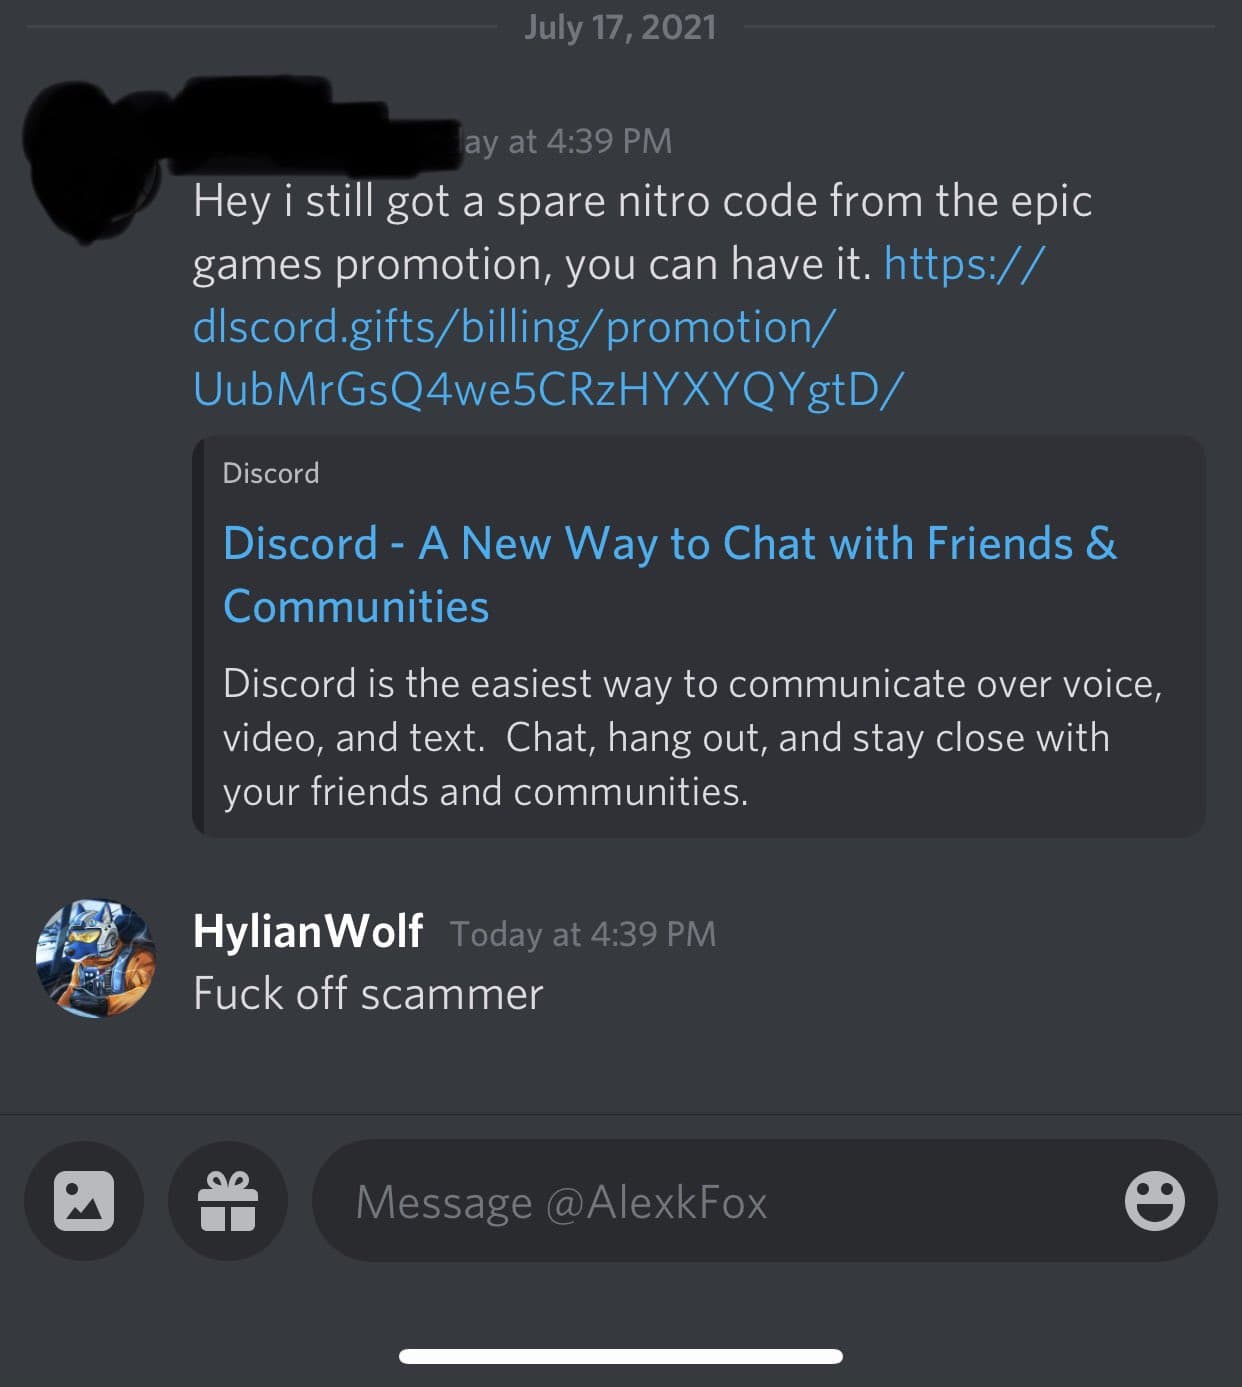 How to Use Discord Nitro for Free with the Epic Games Promo